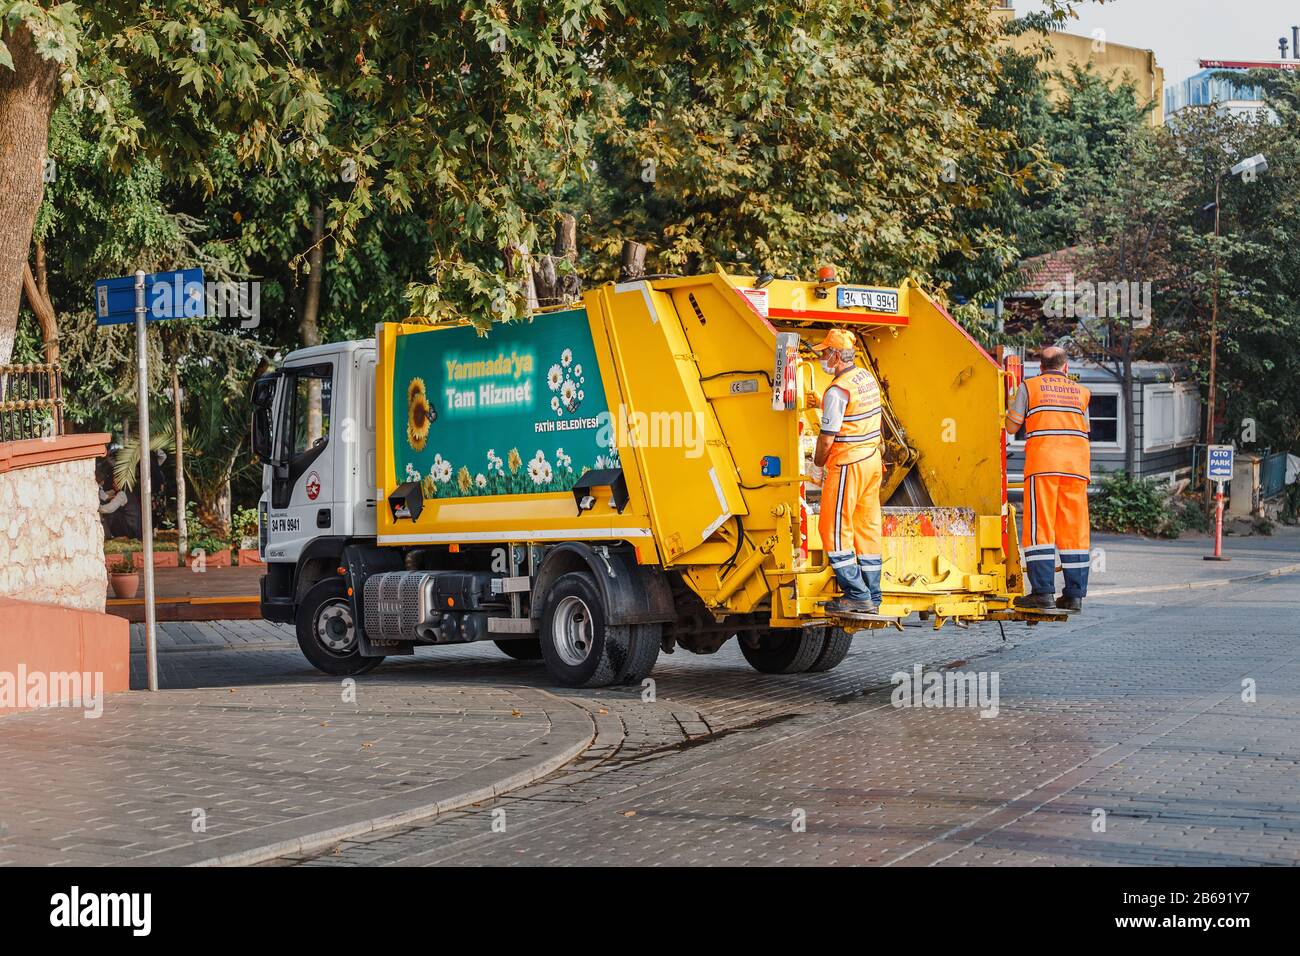 ISTANBUL, TURKEY - SEPTEMBER 10, 2017: Orange garbage truck on the central streets of Sultan ahmet Stock Photo